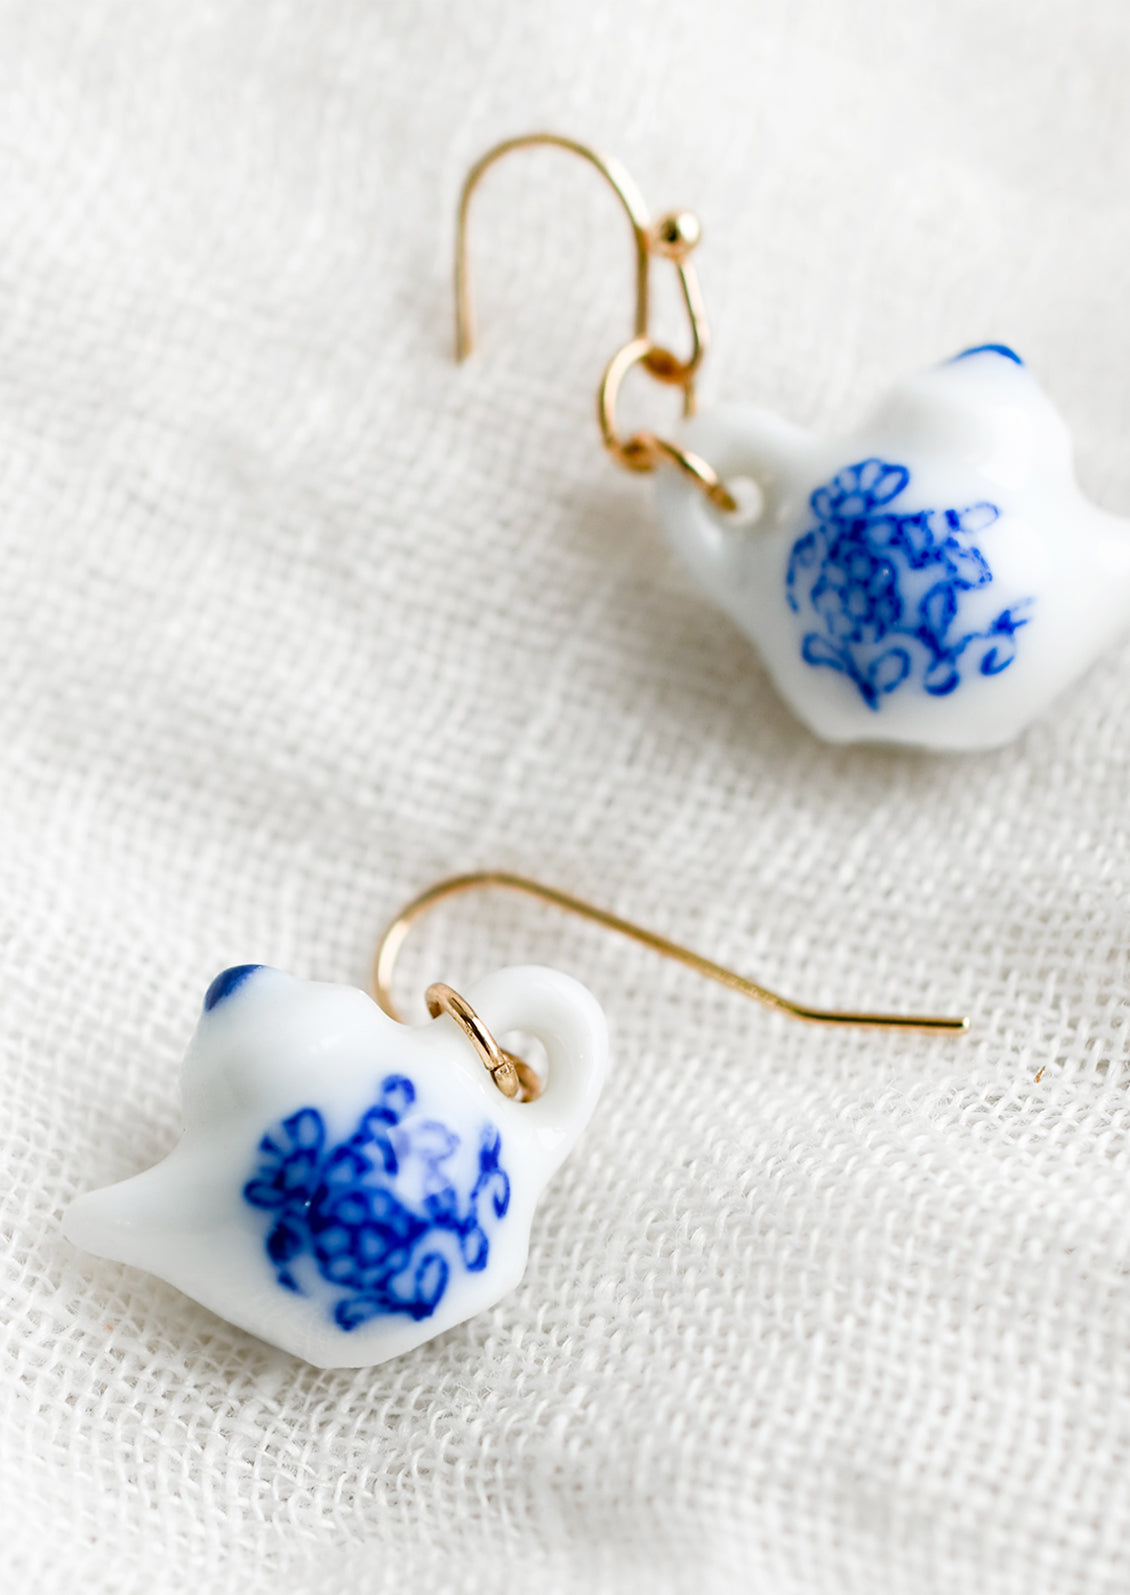 A pair of earrings in shape of white teapot with blue floral print.